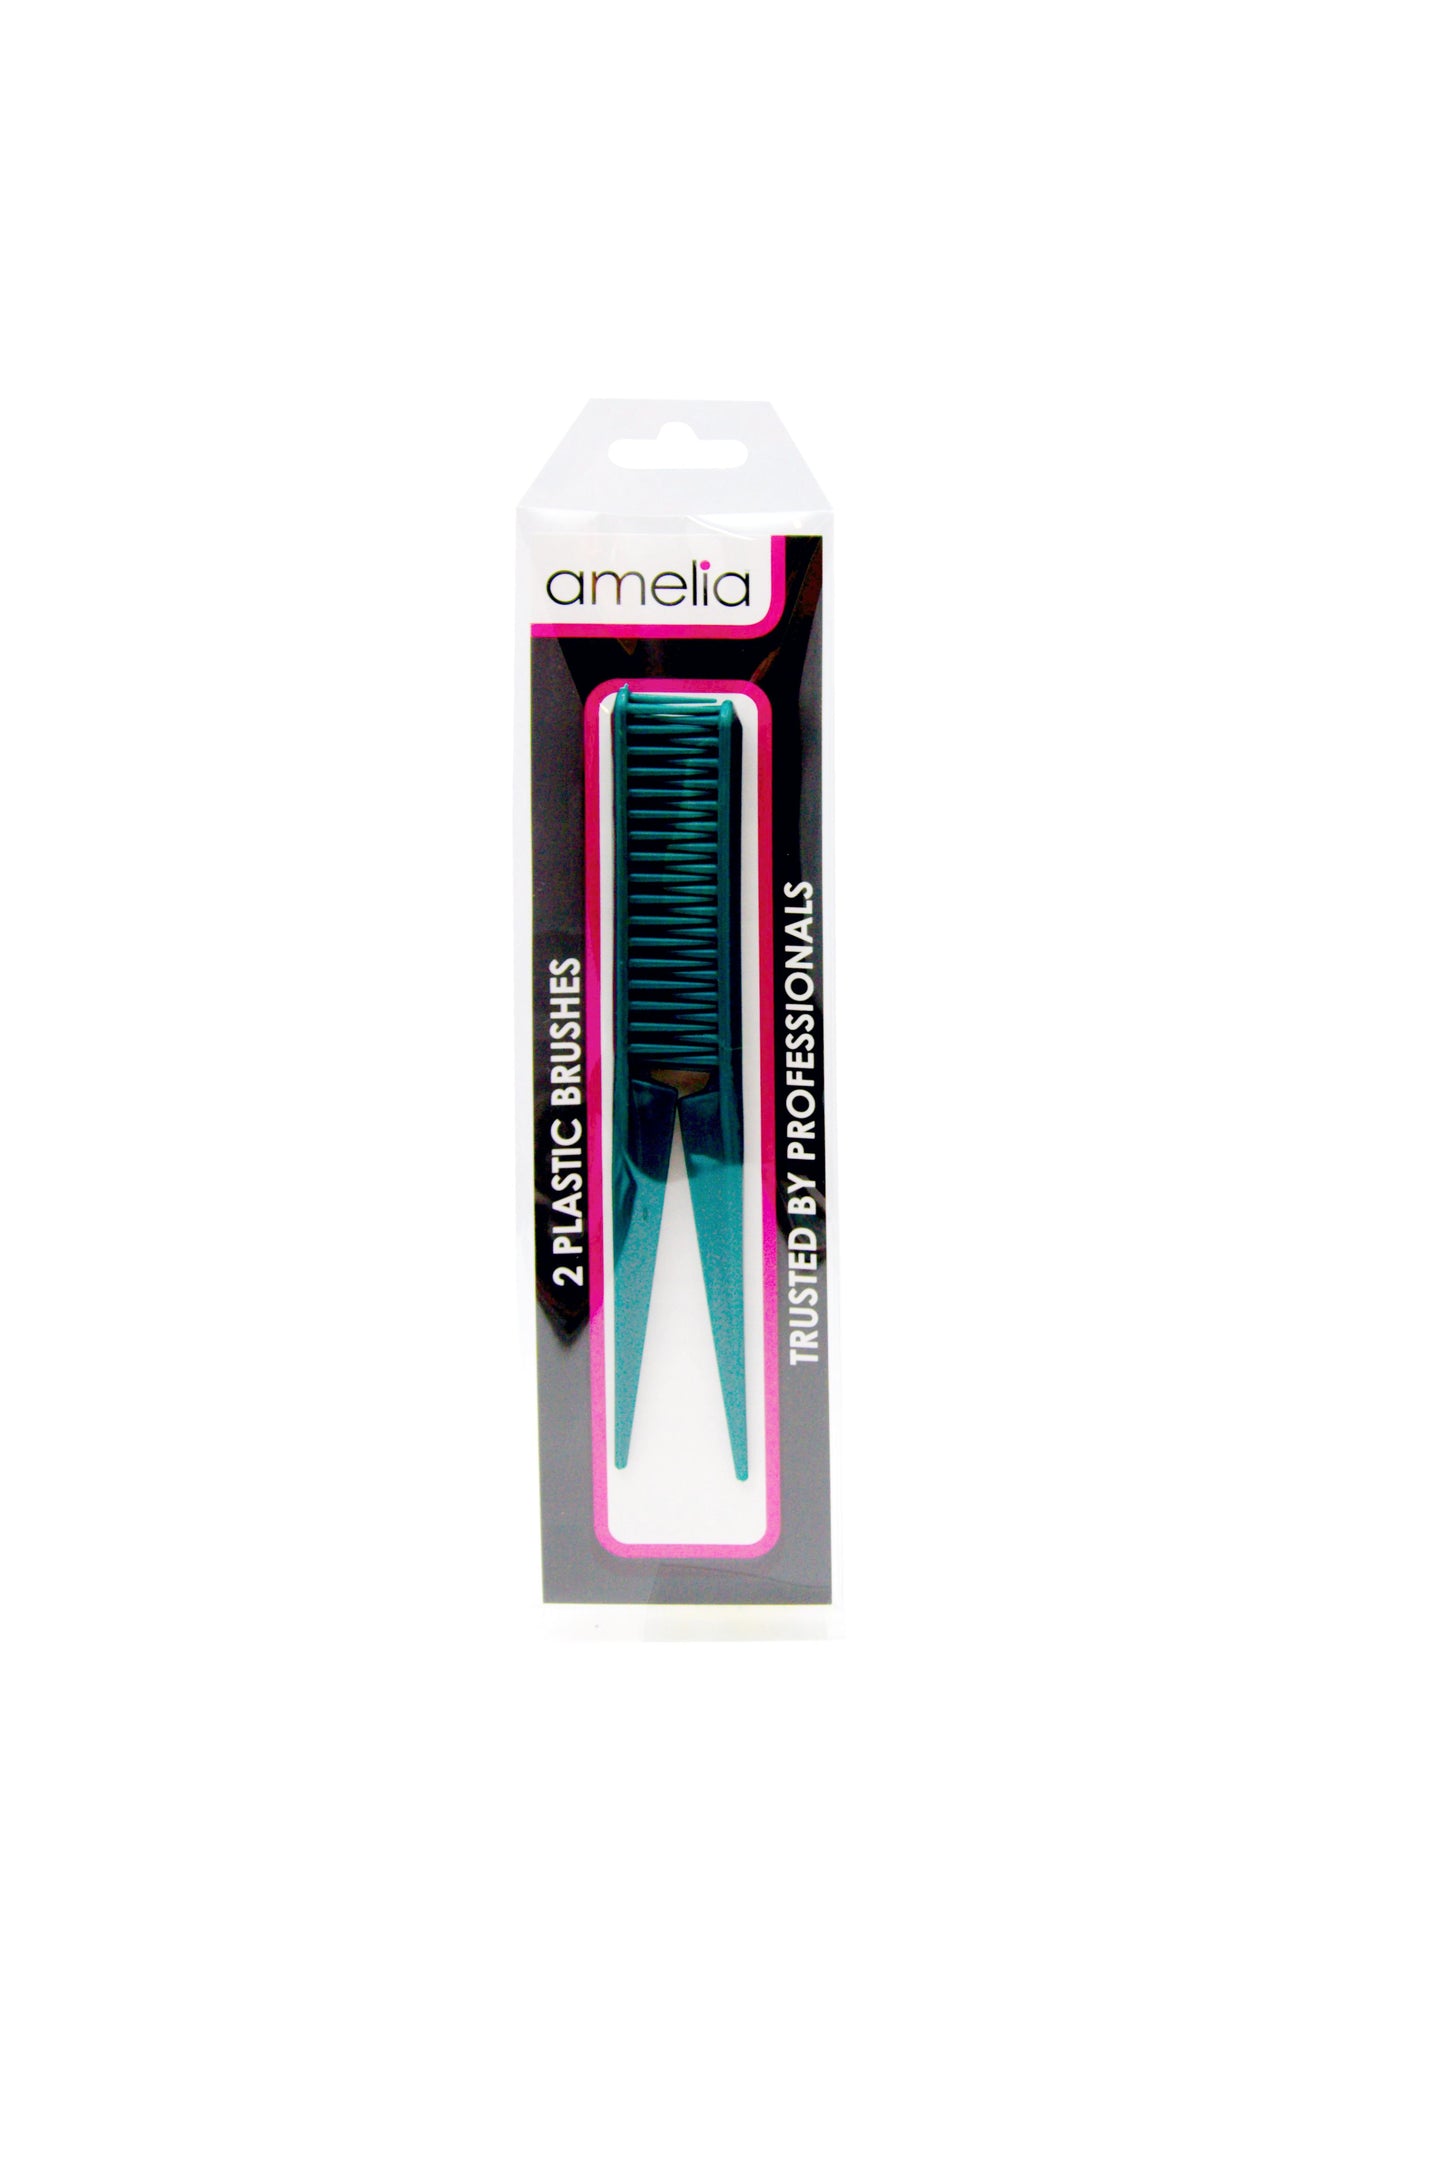 Amelia Beauty, 7in, 3 Row Styling Comb For Detangling, Tease, Defining And Separating Curls - Green